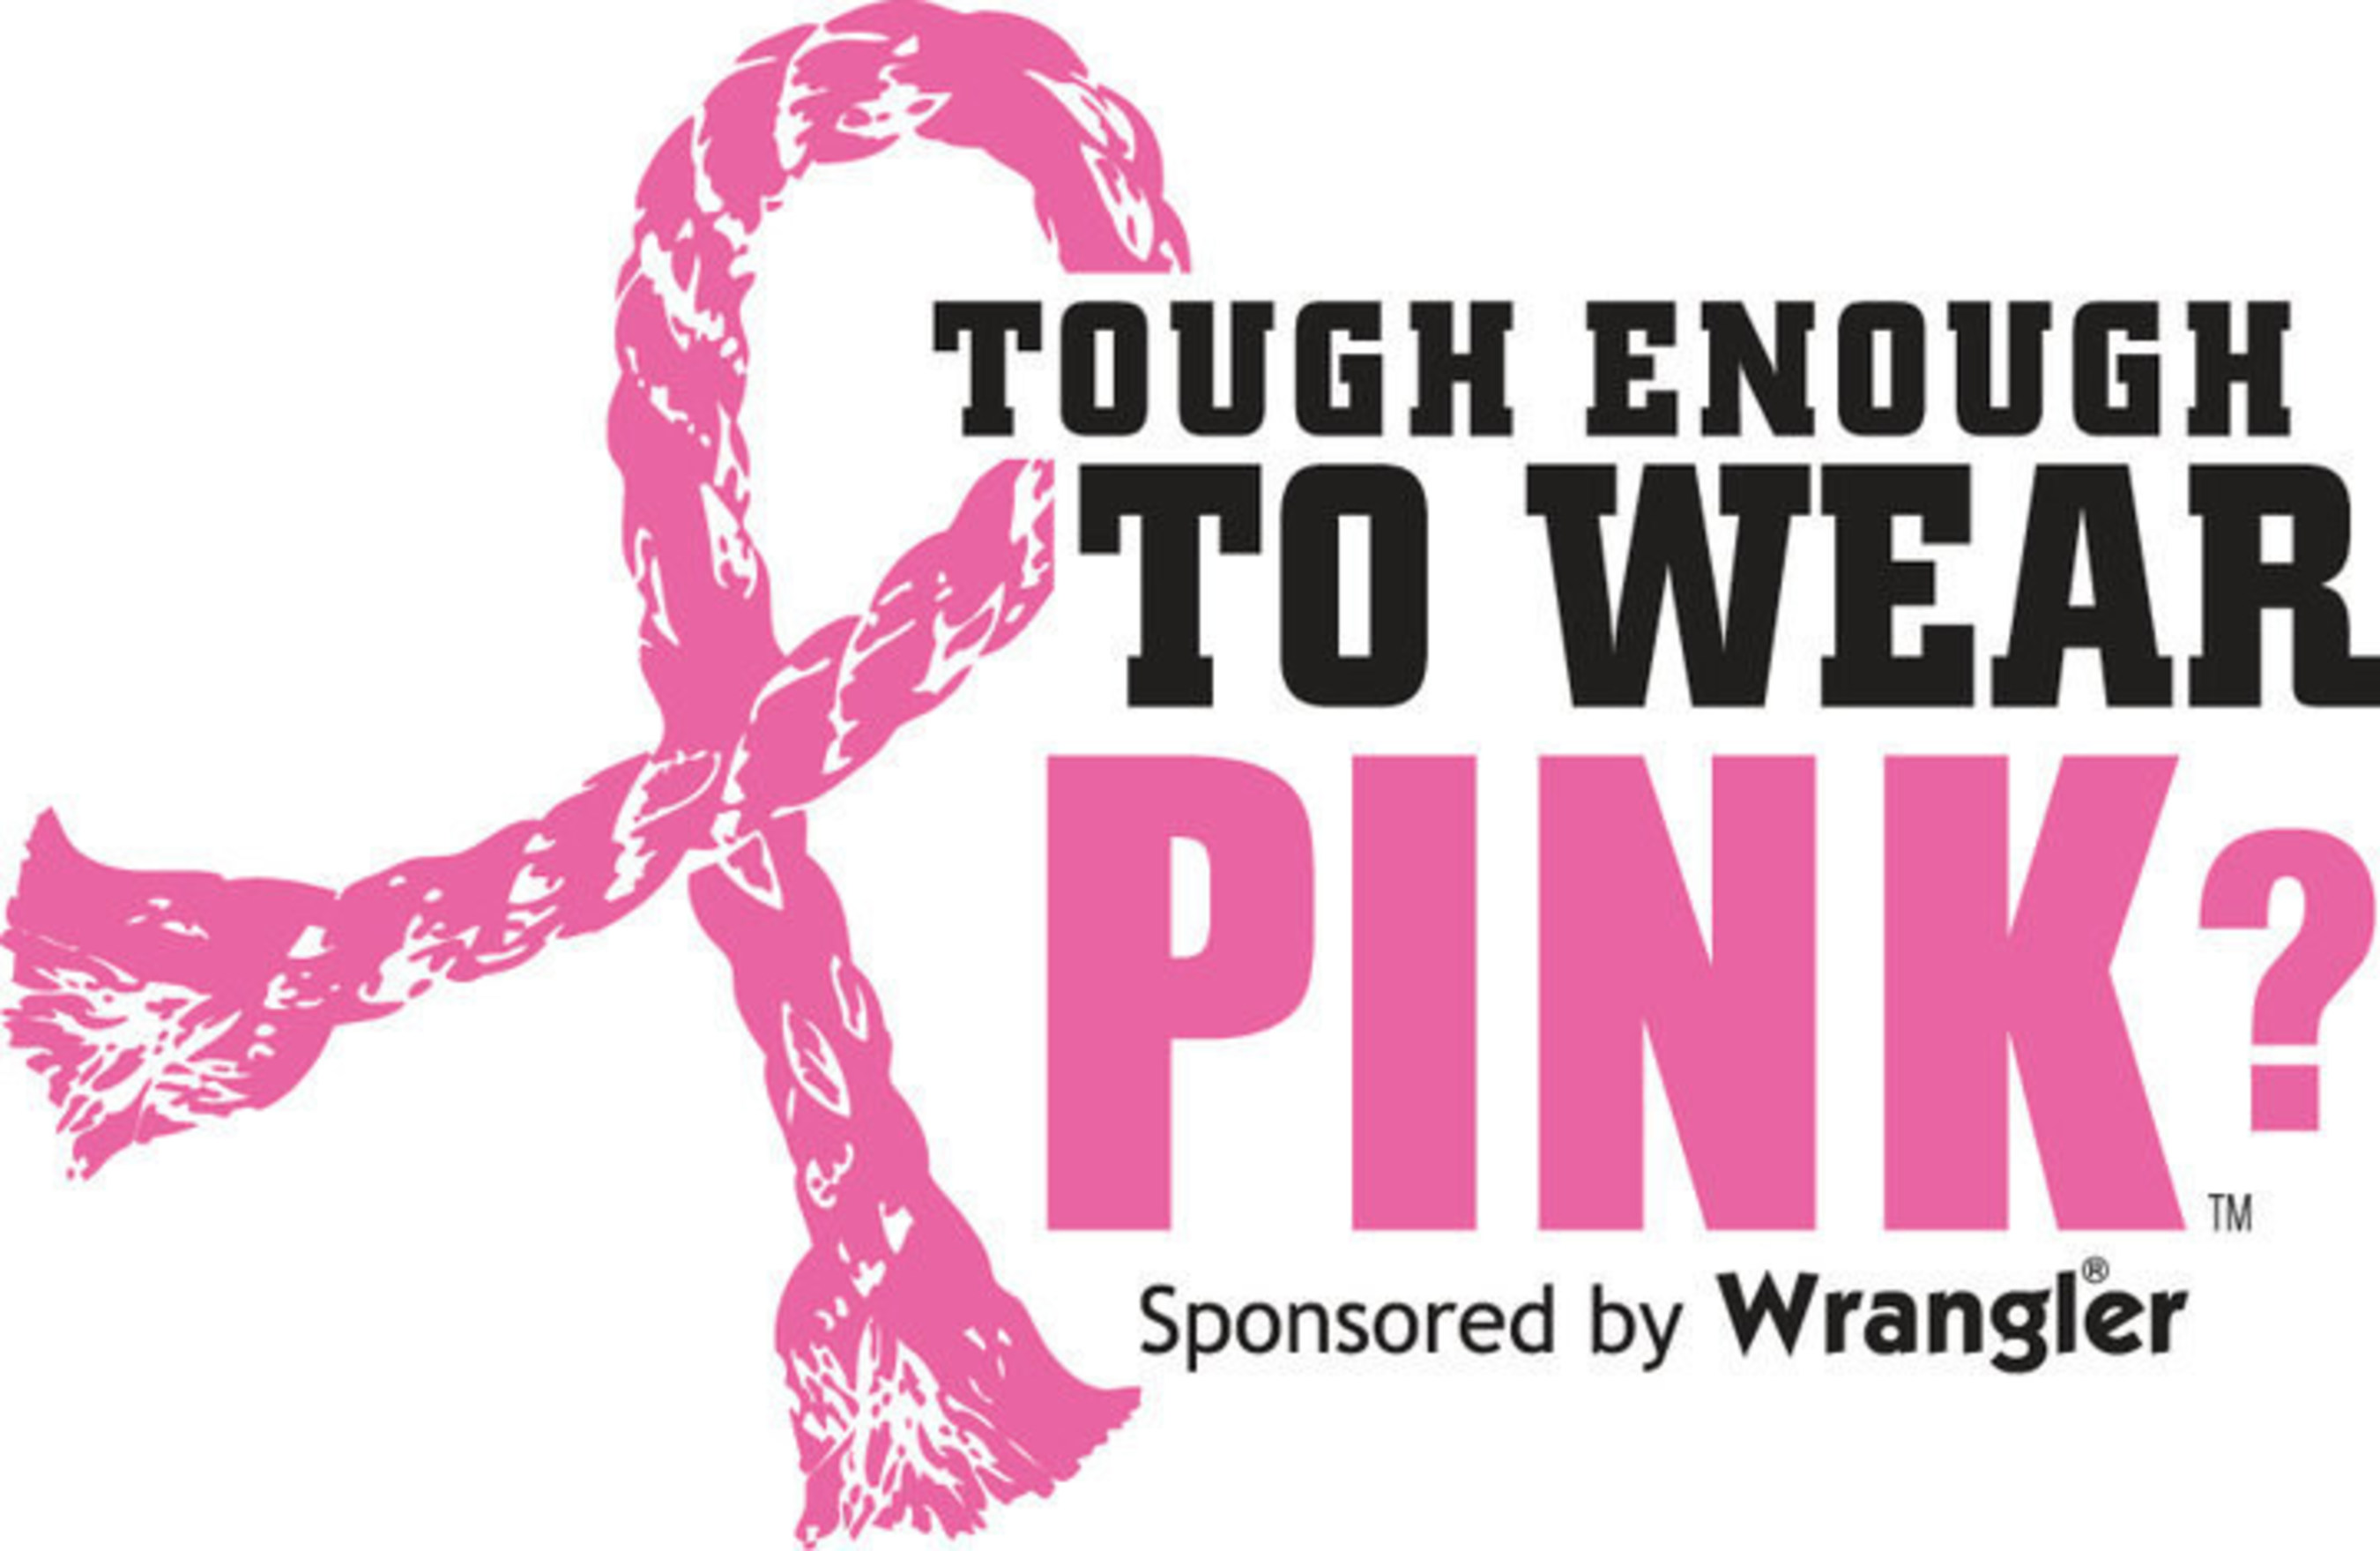 The Wrangler® Tough Enough to Wear Pink?™ Western Campaign to fight breast  cancer reaches $25 million raised mark